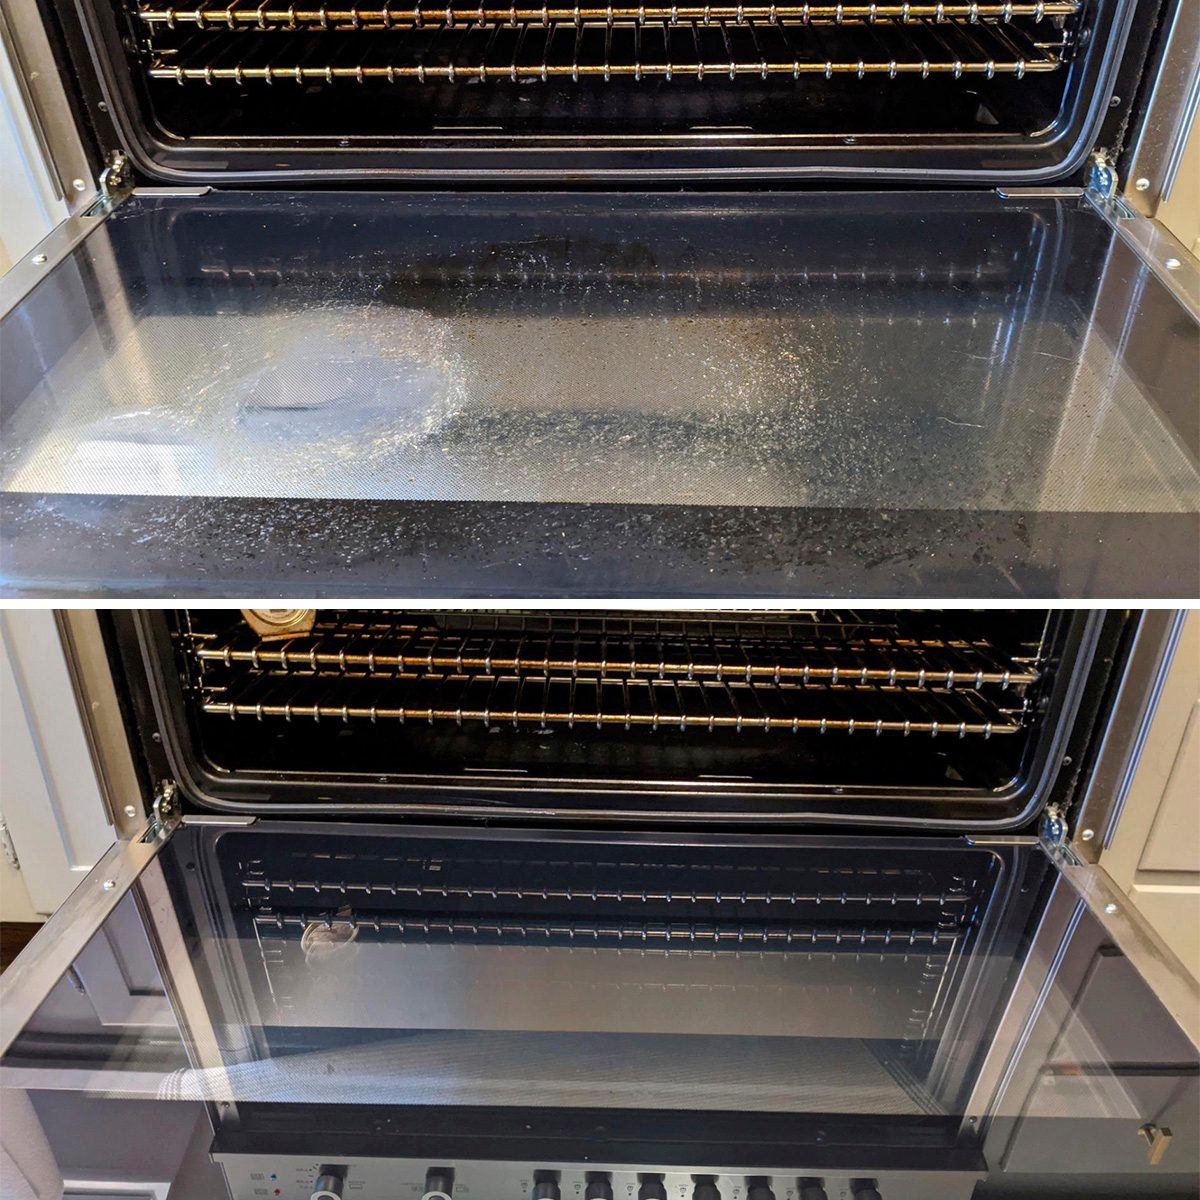 CLEANING OVEN WITH THE PINK STUFF